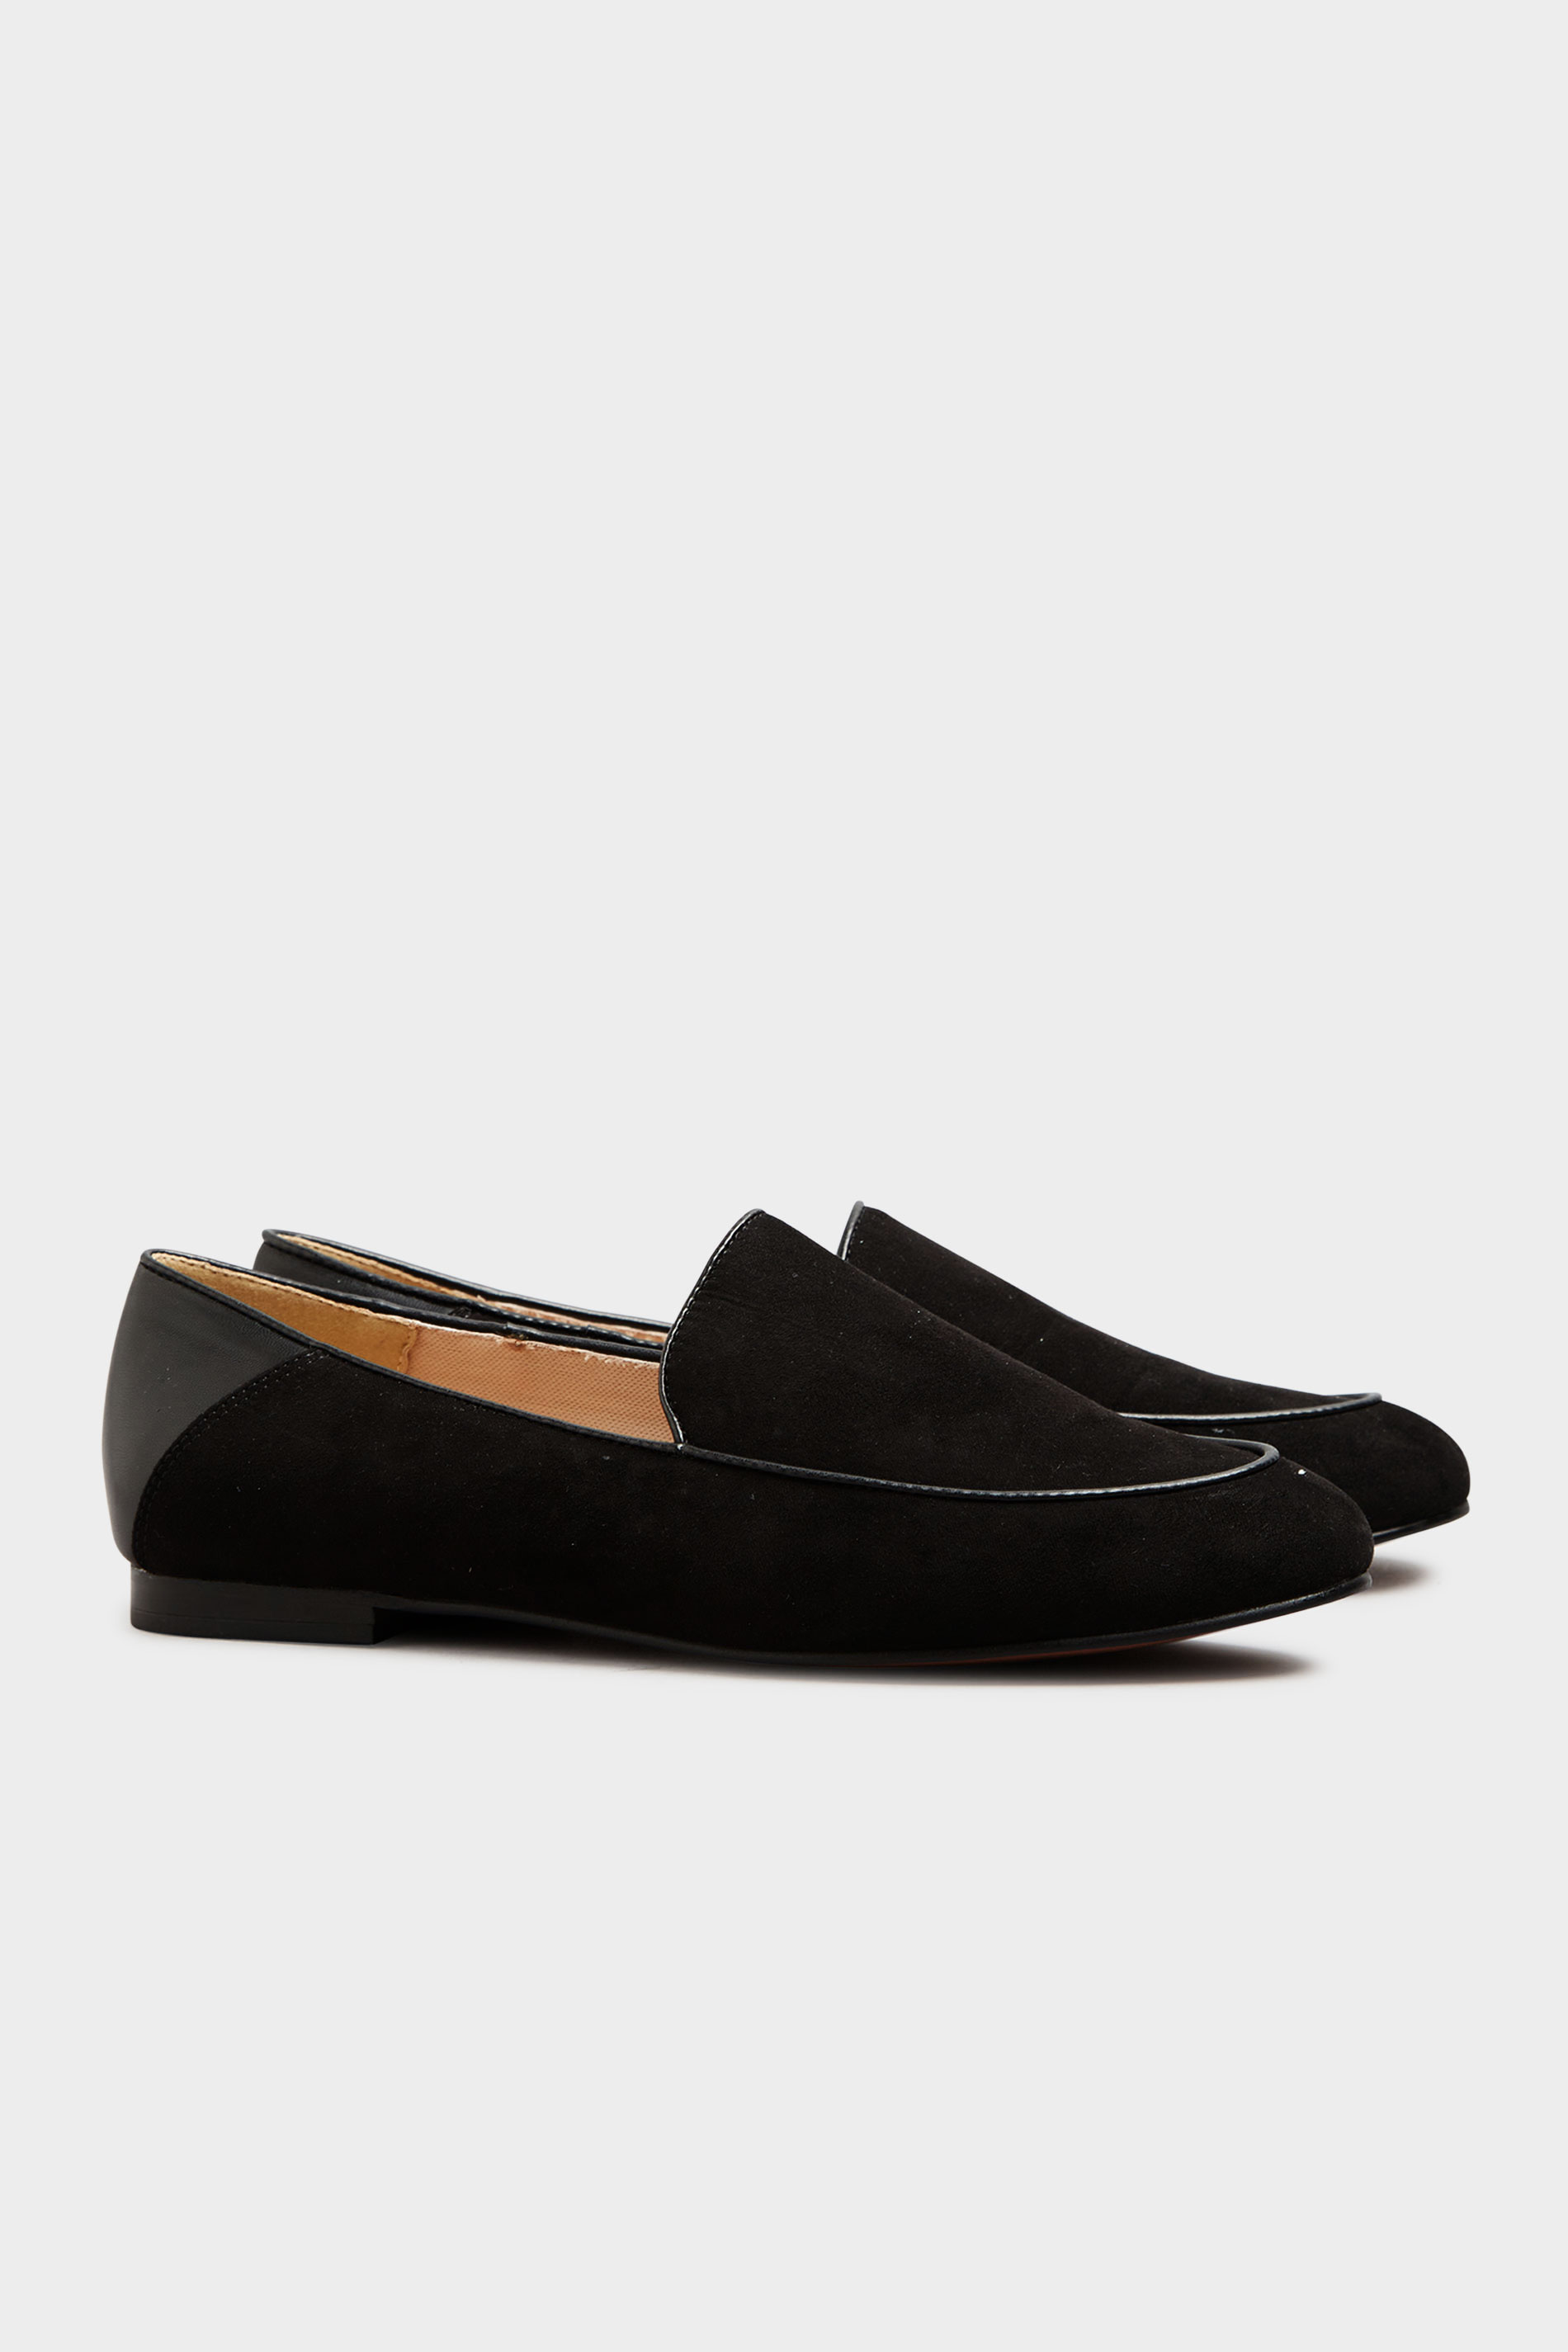 LTS Black Suede Loafers In Standard Fit | Long Tall Sally  1